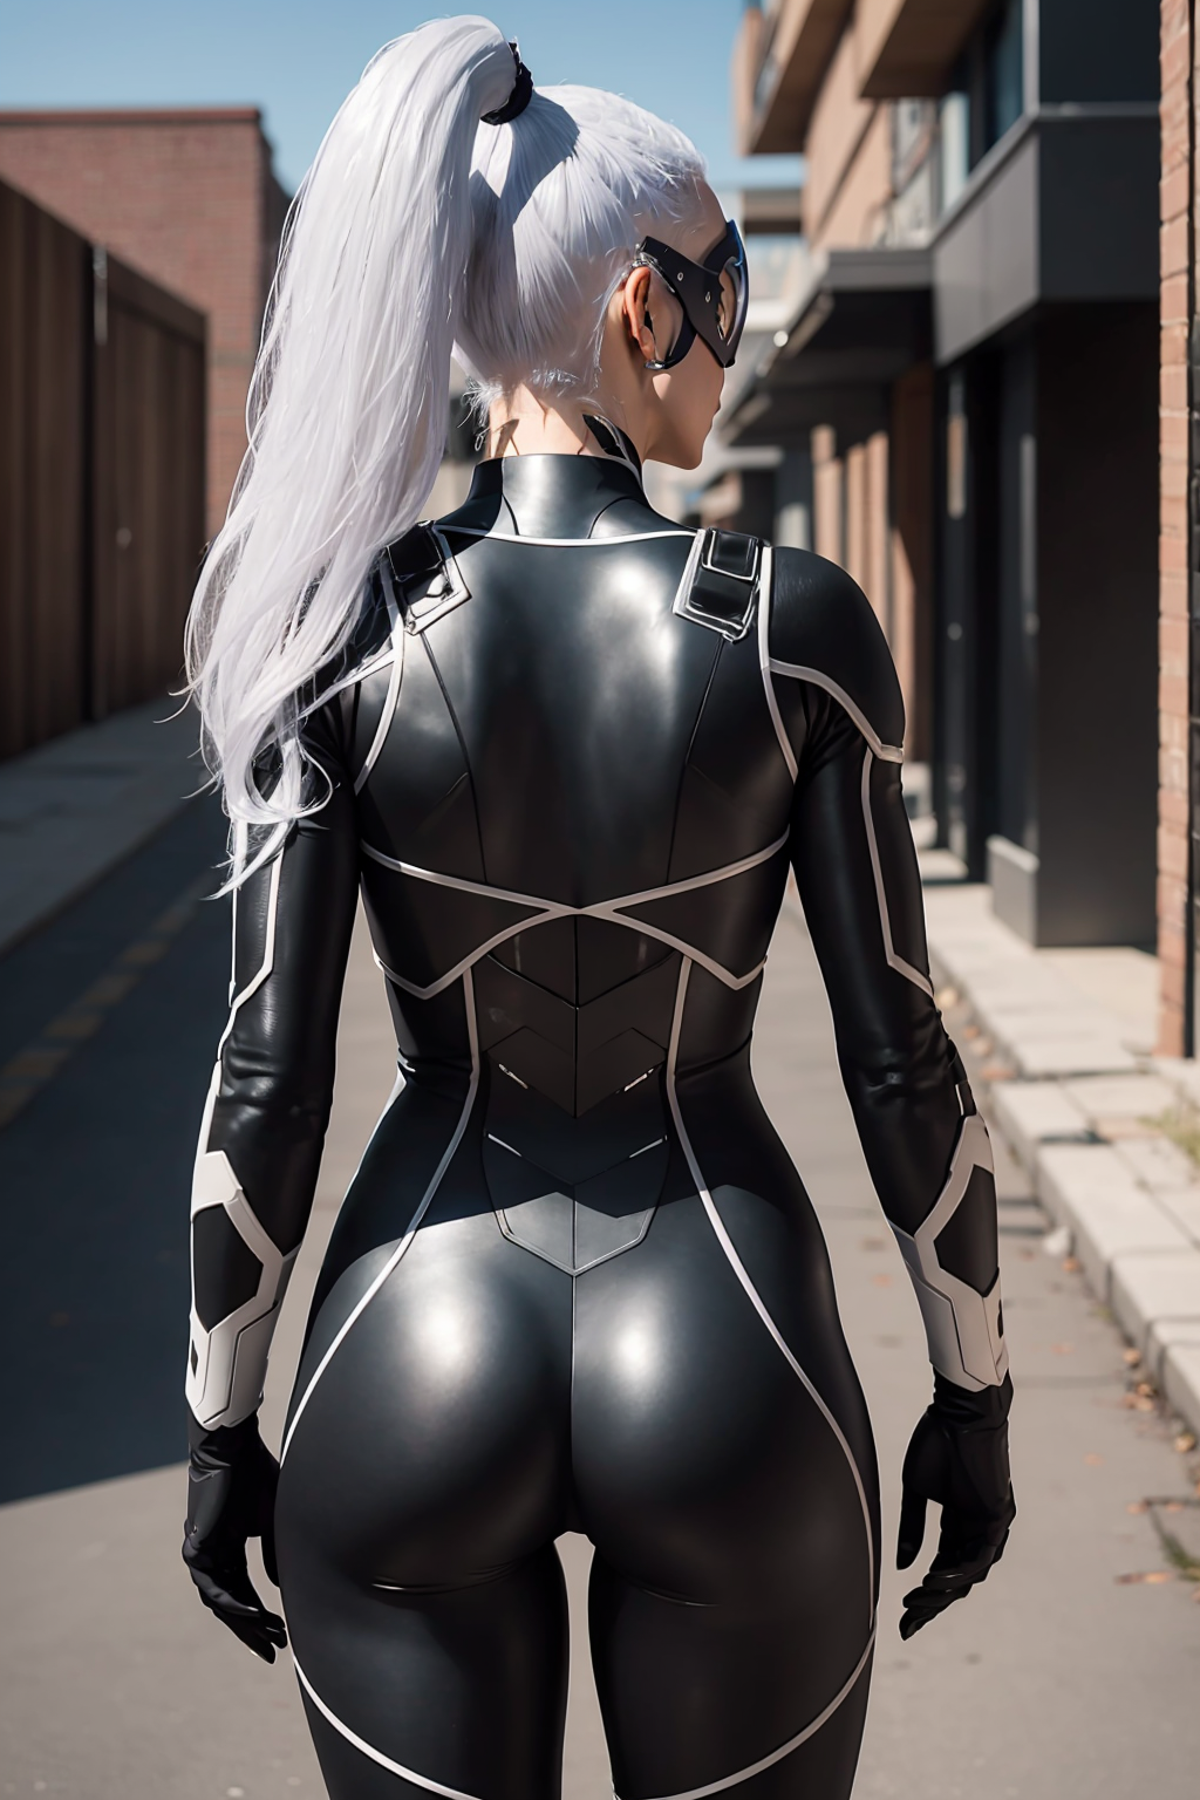 Felicia Hardy / Black cat | LoRA | Spiderman | 3D Game Style | Realistic image by Blake_Hua